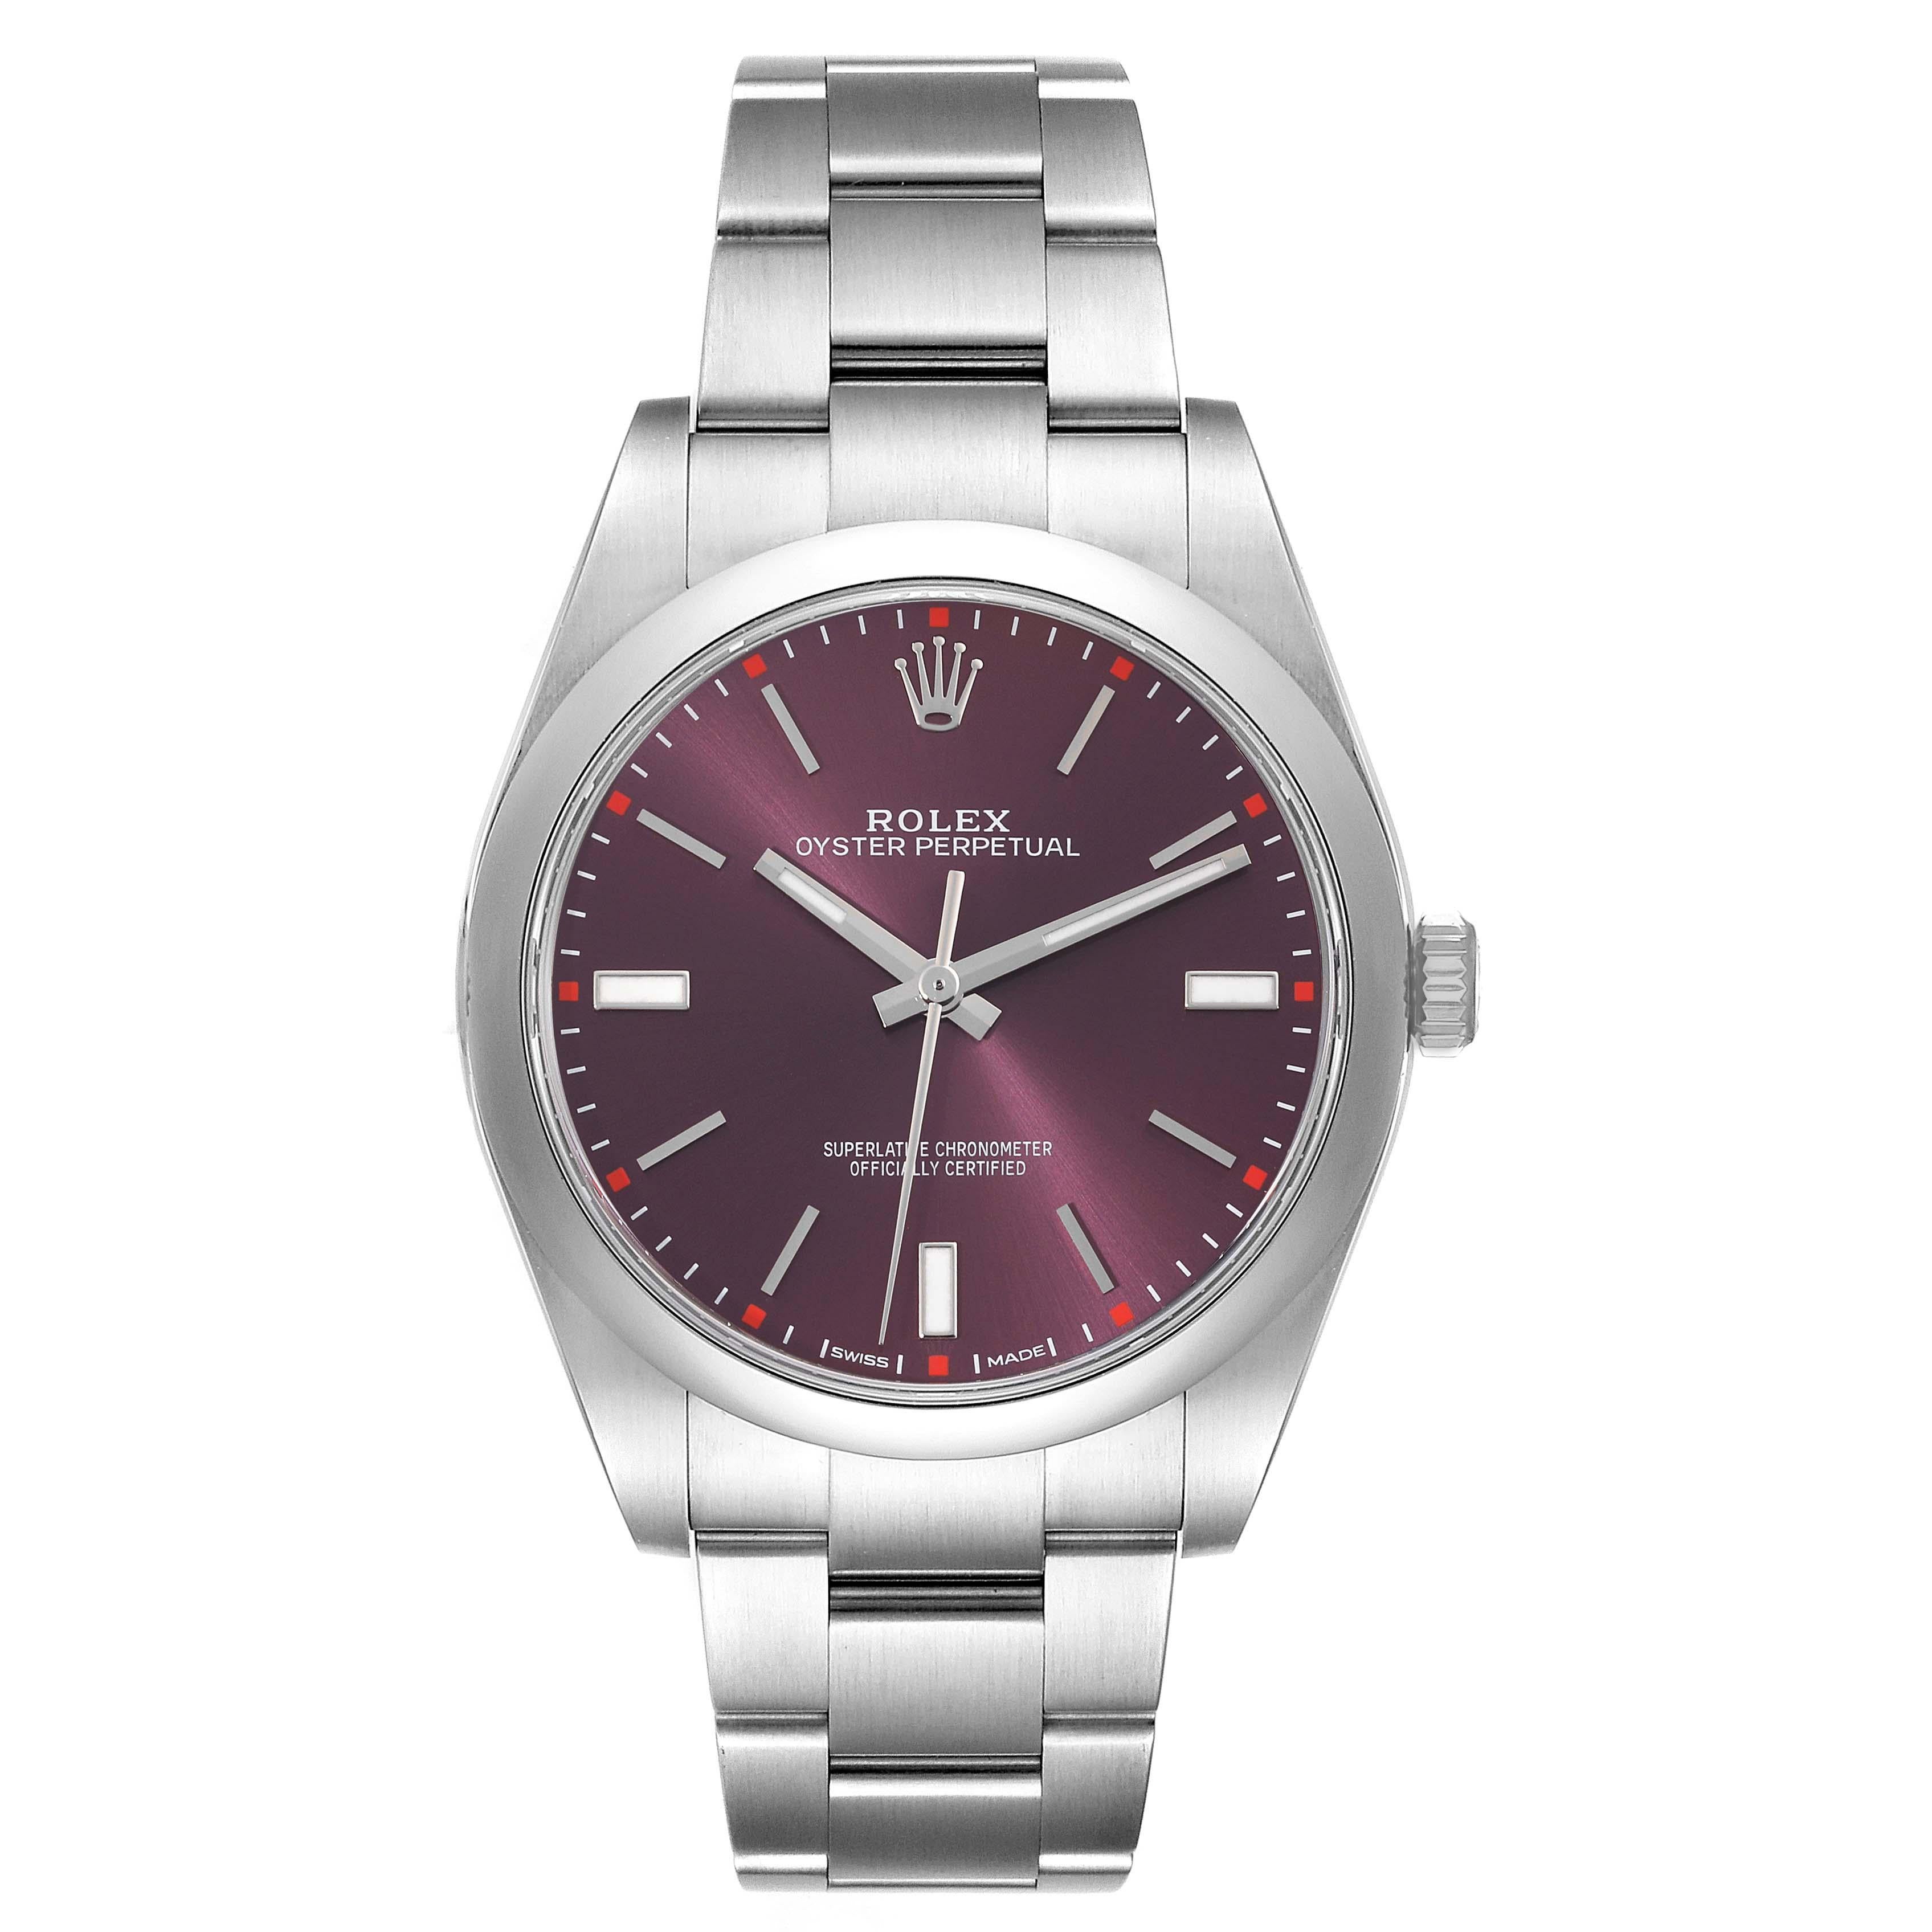 Rolex Oyster Perpetual Red Grape Dial Steel Mens Watch 114300 Box Card. Officially certified chronometer self-winding movement. Stainless steel case 39.0 mm in diameter. Rolex logo on a crown. Stainless steel smooth domed bezel. Scratch resistant